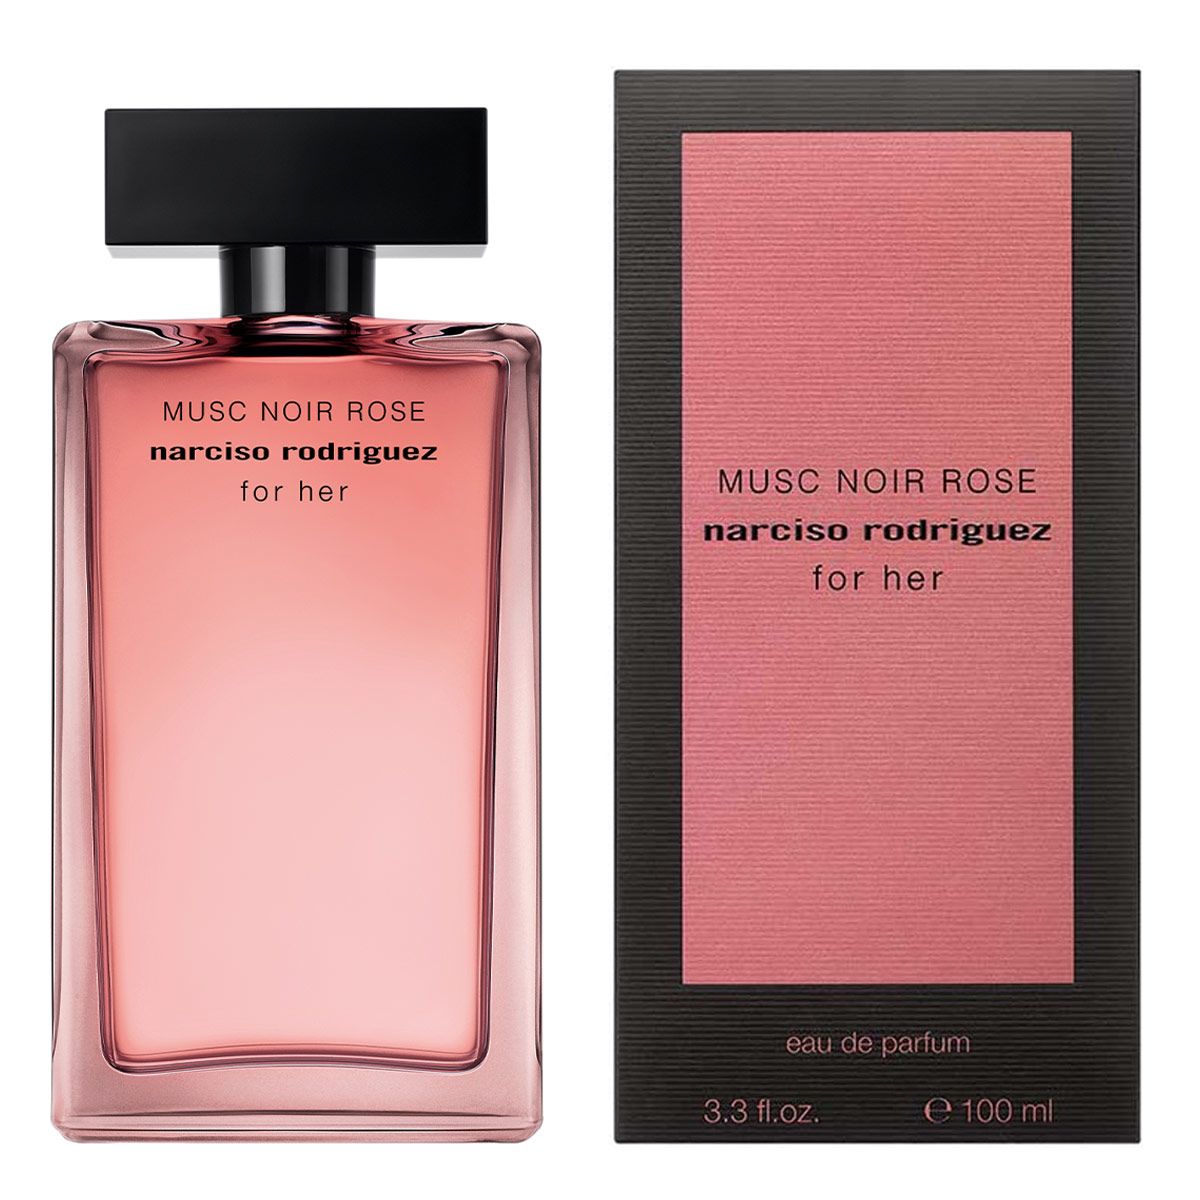  Narciso Rodriguez For Her Musc Noir Rose 